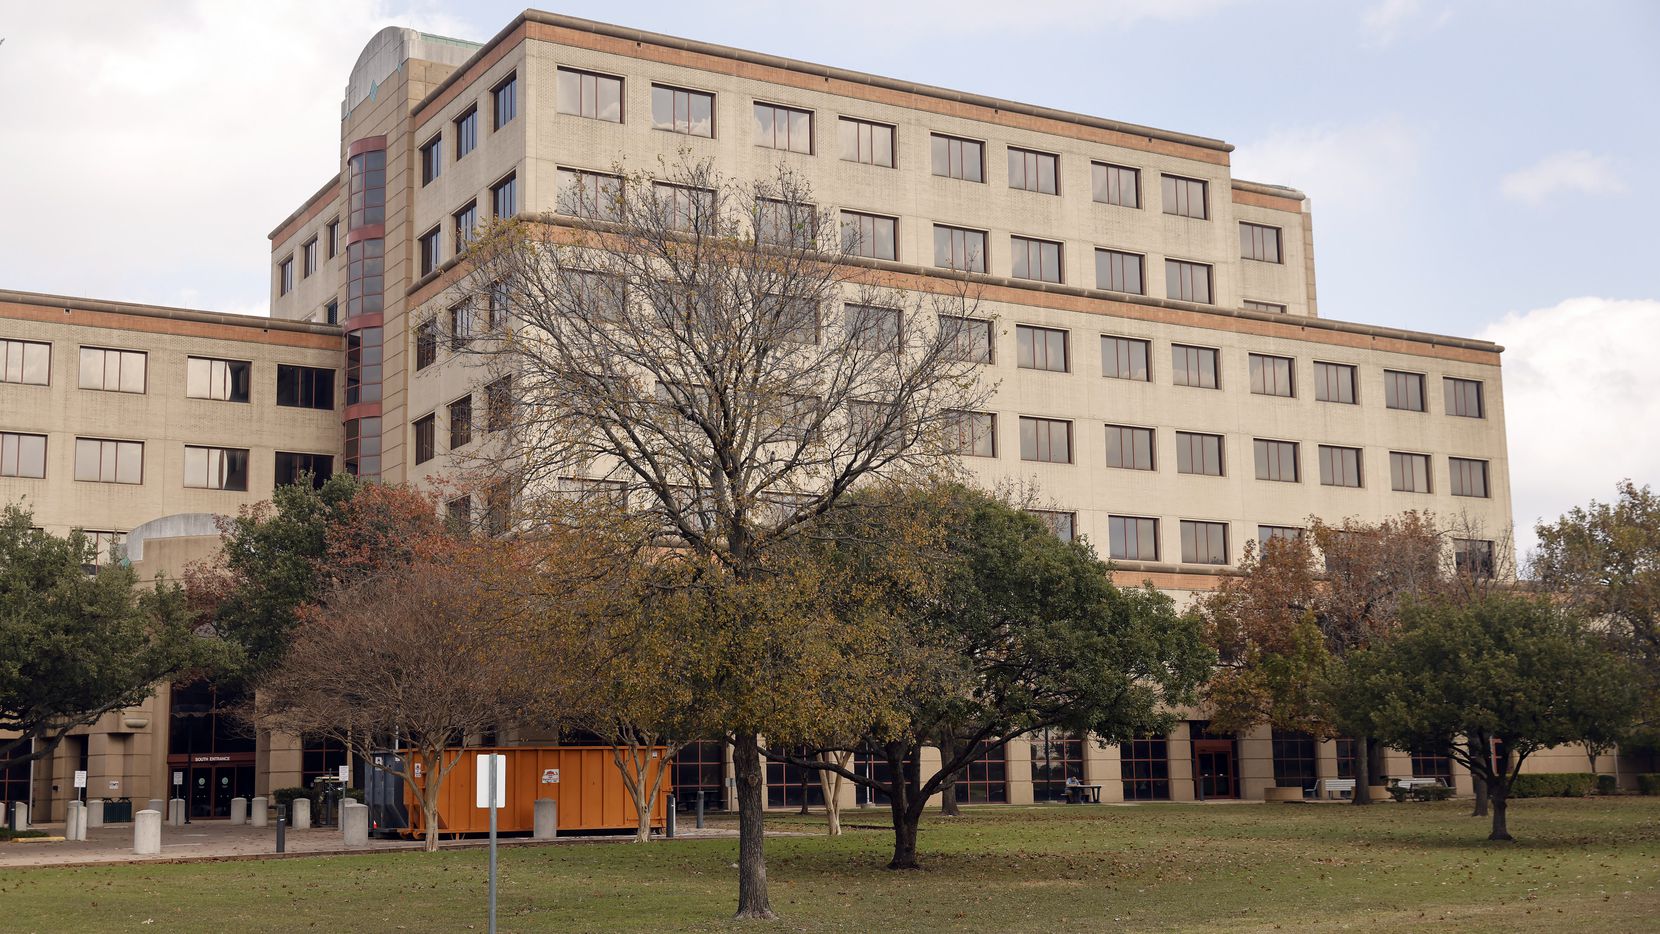 The Brown Heatly building which houses the Department of Family and Protective Services is pictured in Austin, Texas, Friday, December 10, 2021. (Tom Fox/The Dallas Morning News)